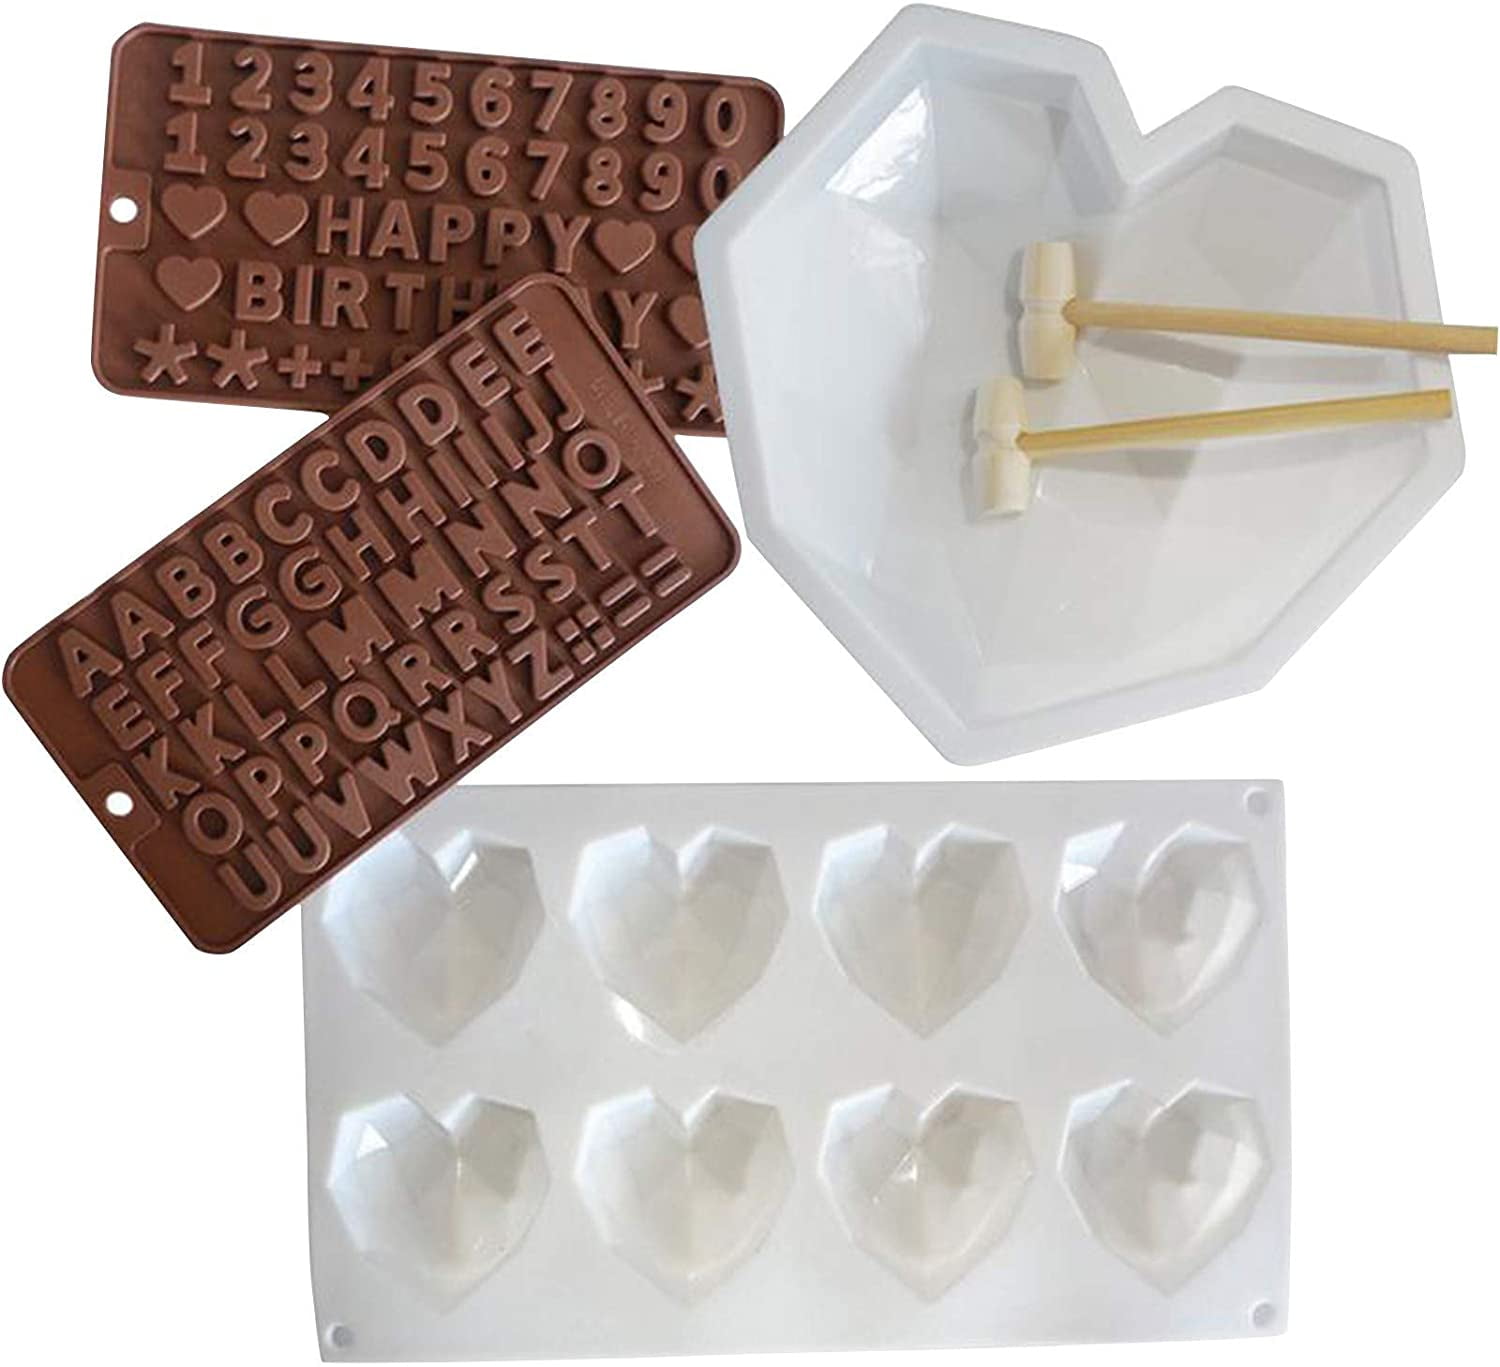 6 Pieces Diamond Heart Love Mousse Cake Mold Silicone Letter and Number Chocolate Mold with Wooden Hammers and Droppers for Home Kitchen DIY Baking Tools 6Pcs